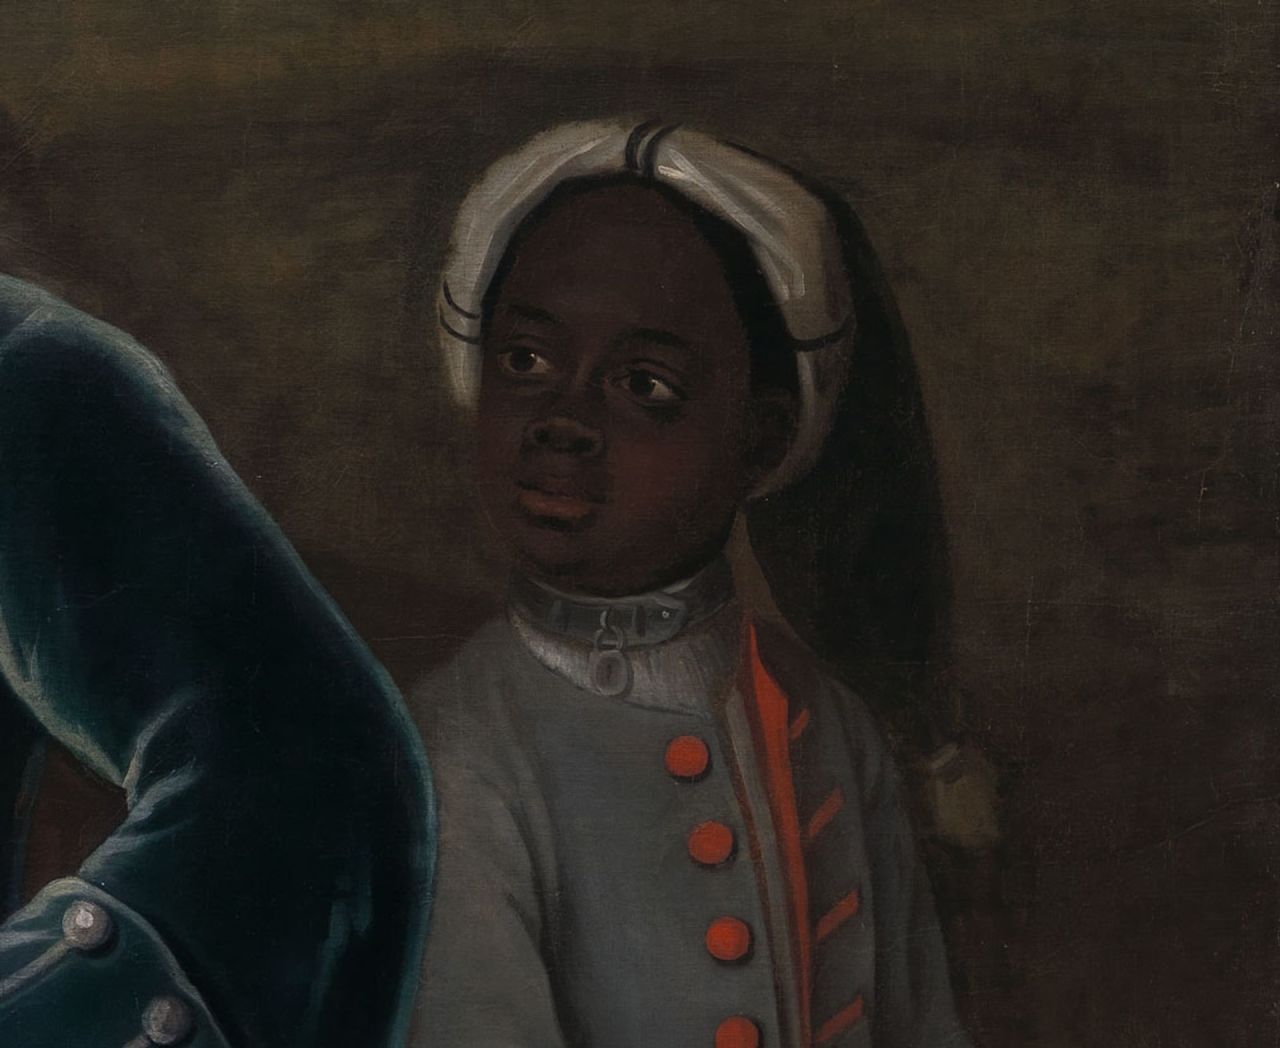 A detail of the 18th-century group portrait, featuring an unknown Black child with Elihu Yale, for whom Yale University was named.